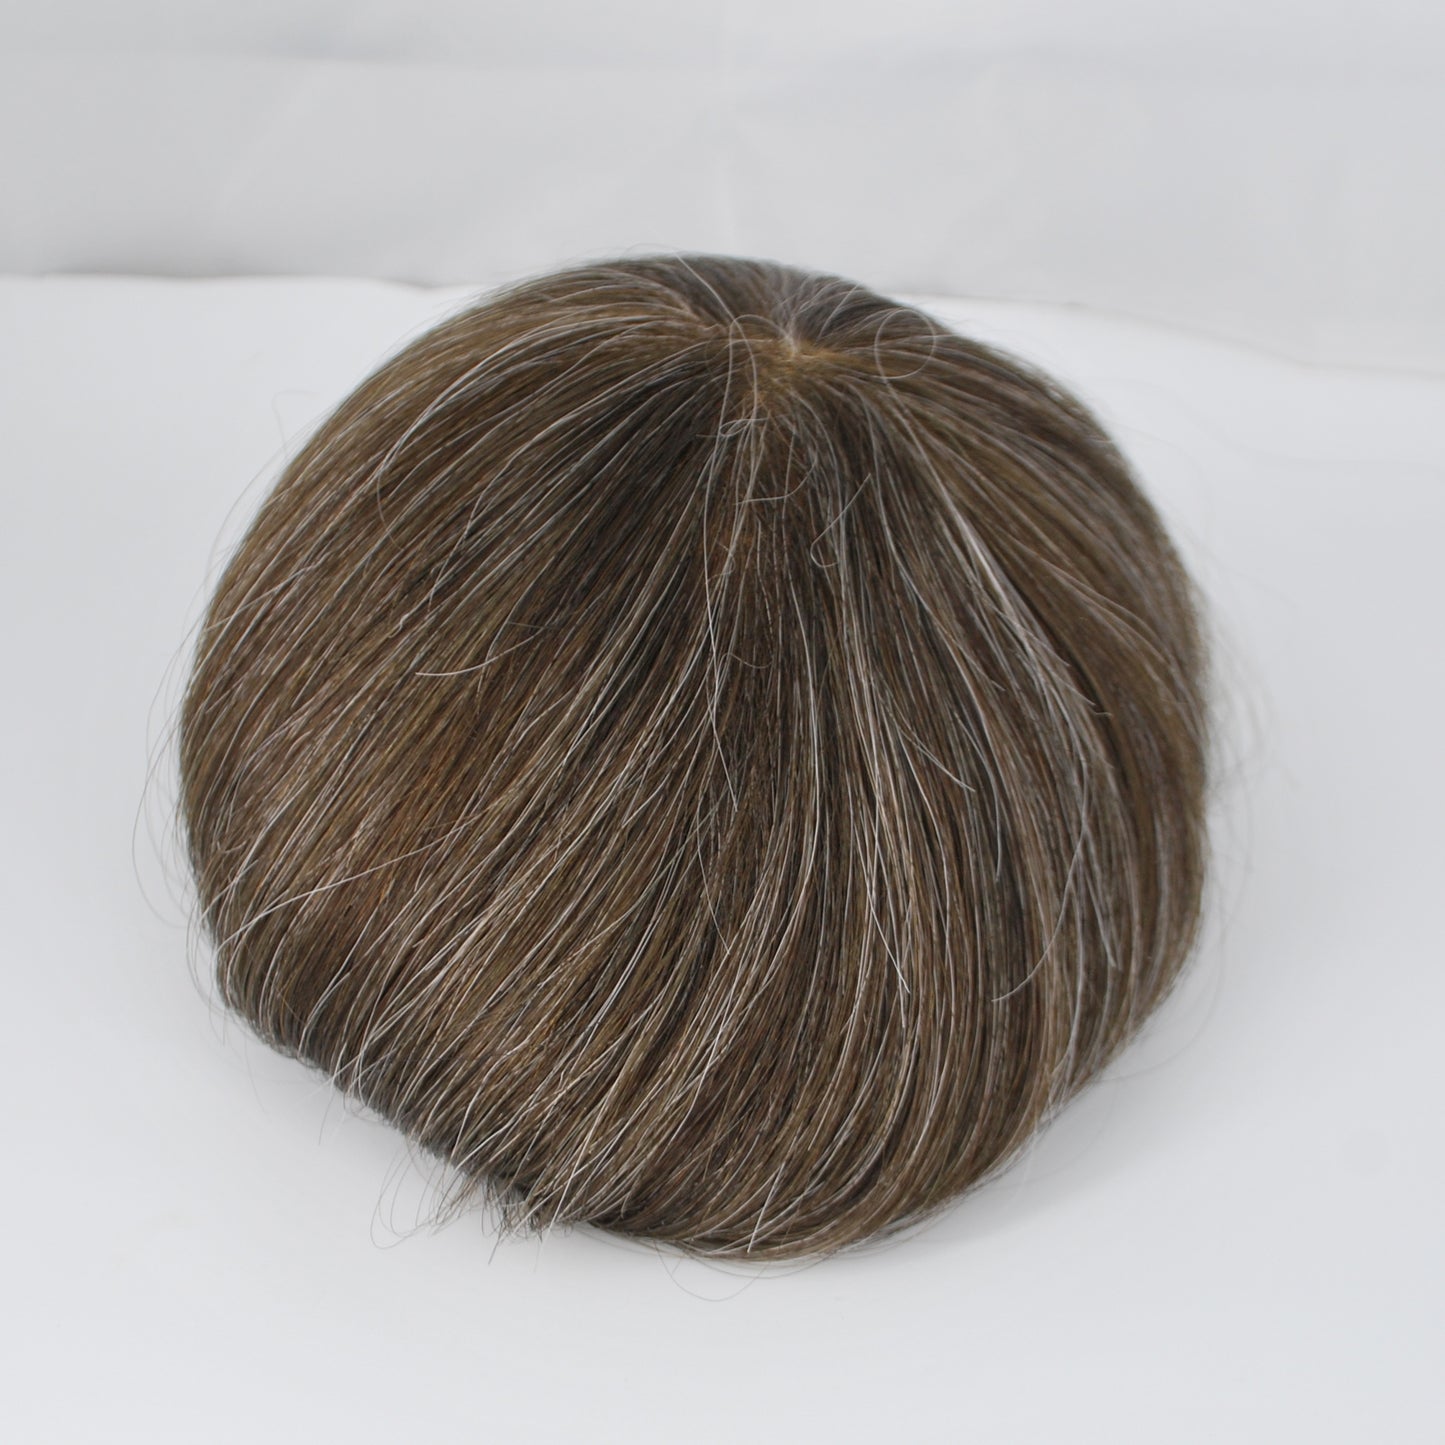 Clearance grey mixed men's toupee #2 25%  full french lace 11x9 hair system replacement